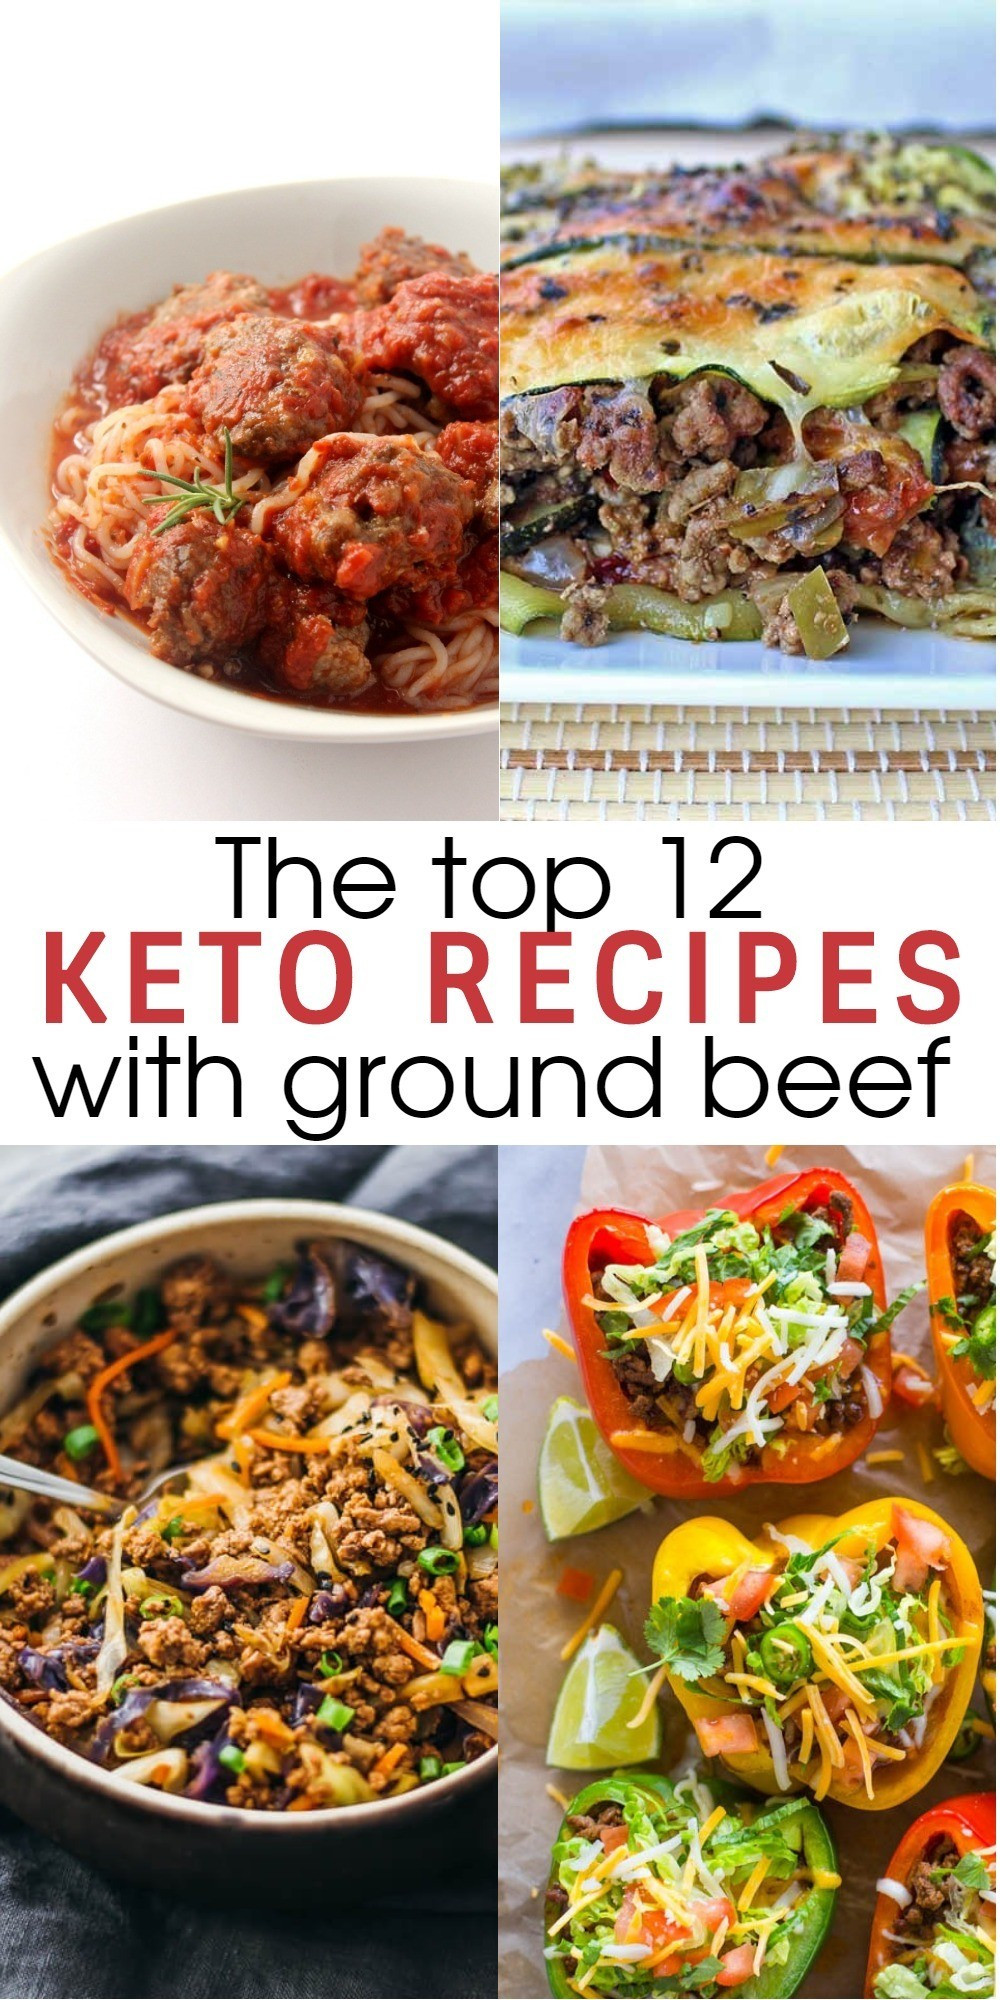 Chopped Meat Recipes Ground Beef Keto
 12 Flavorful and Easy Keto Recipes With Ground Beef To Try